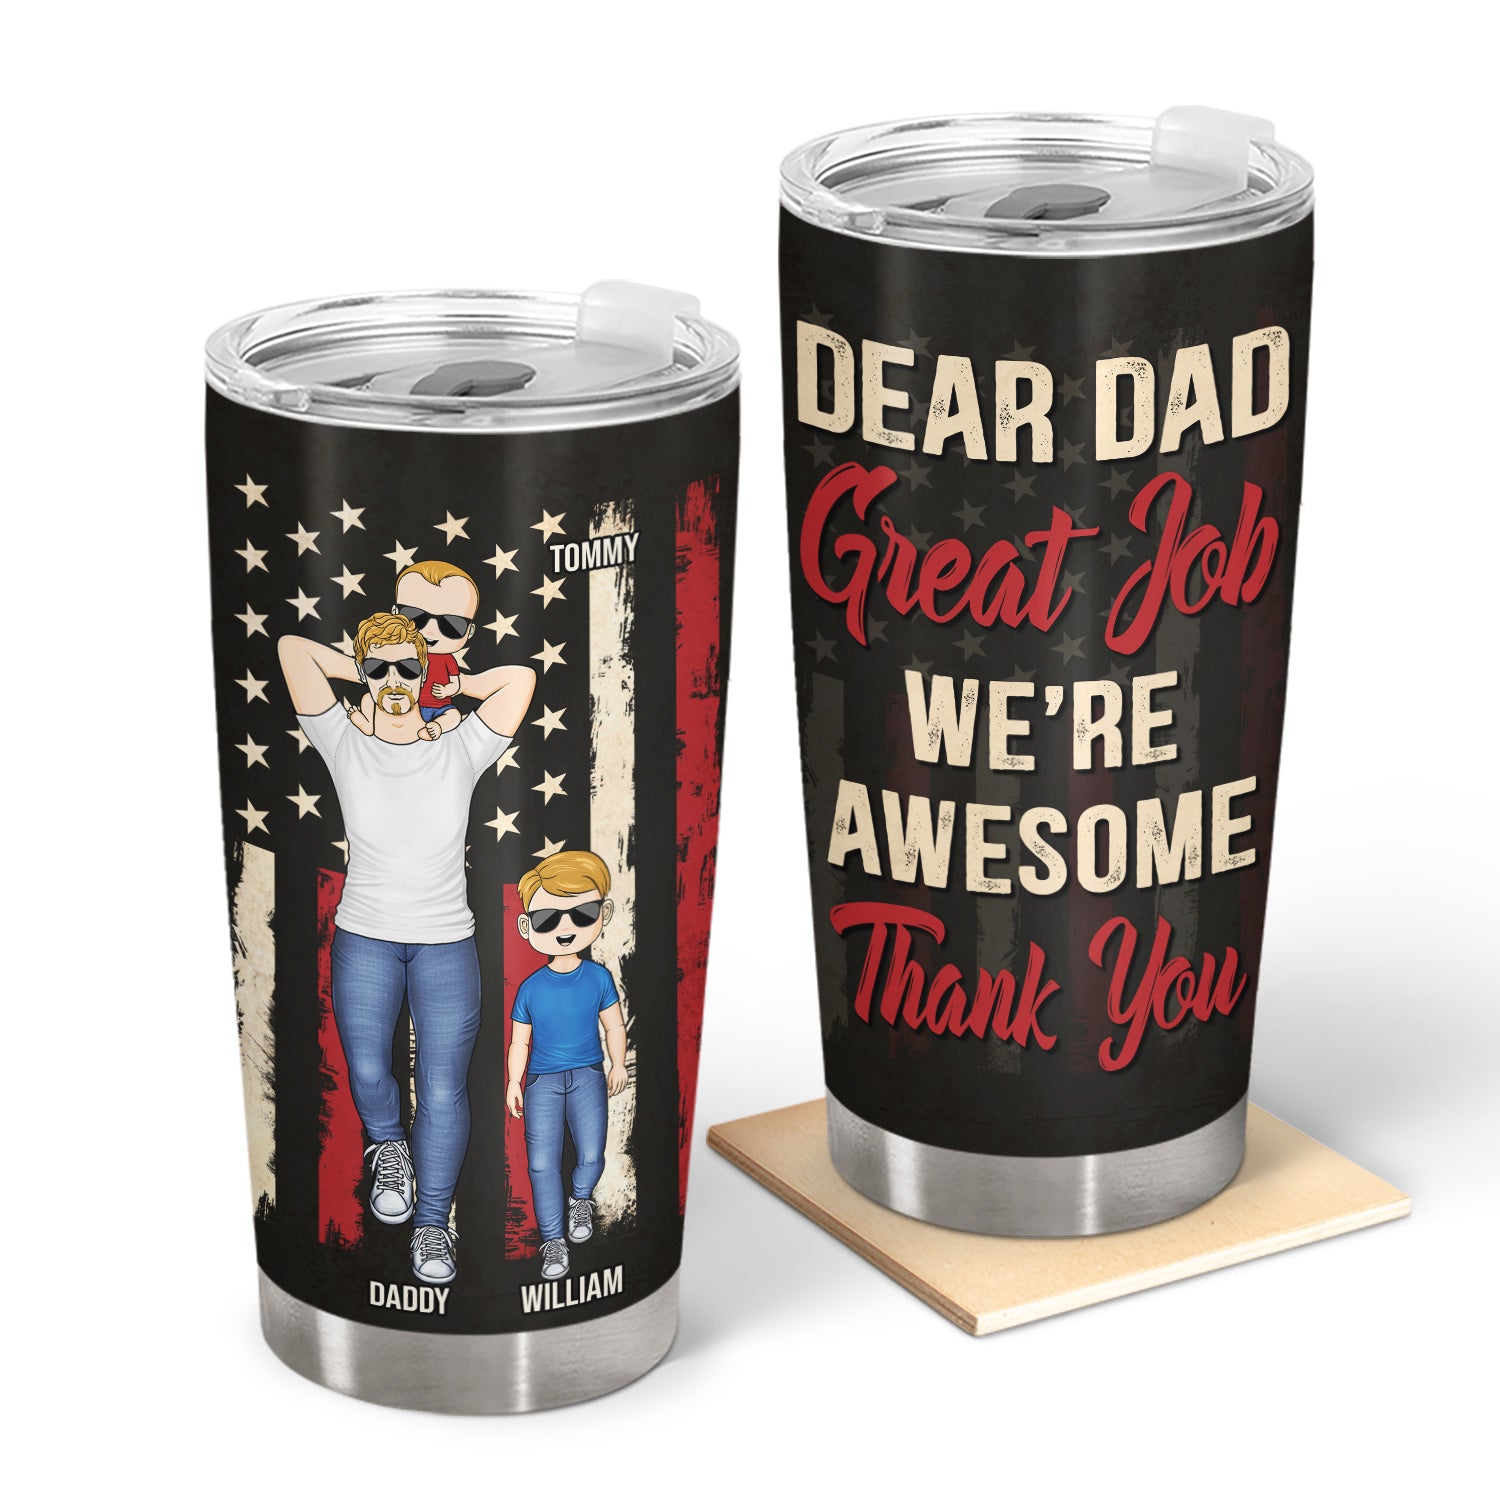 Dear Dad Great Job We're Awesome - Birthday Gift For Father, Grandpa - Personalized Custom Tumbler